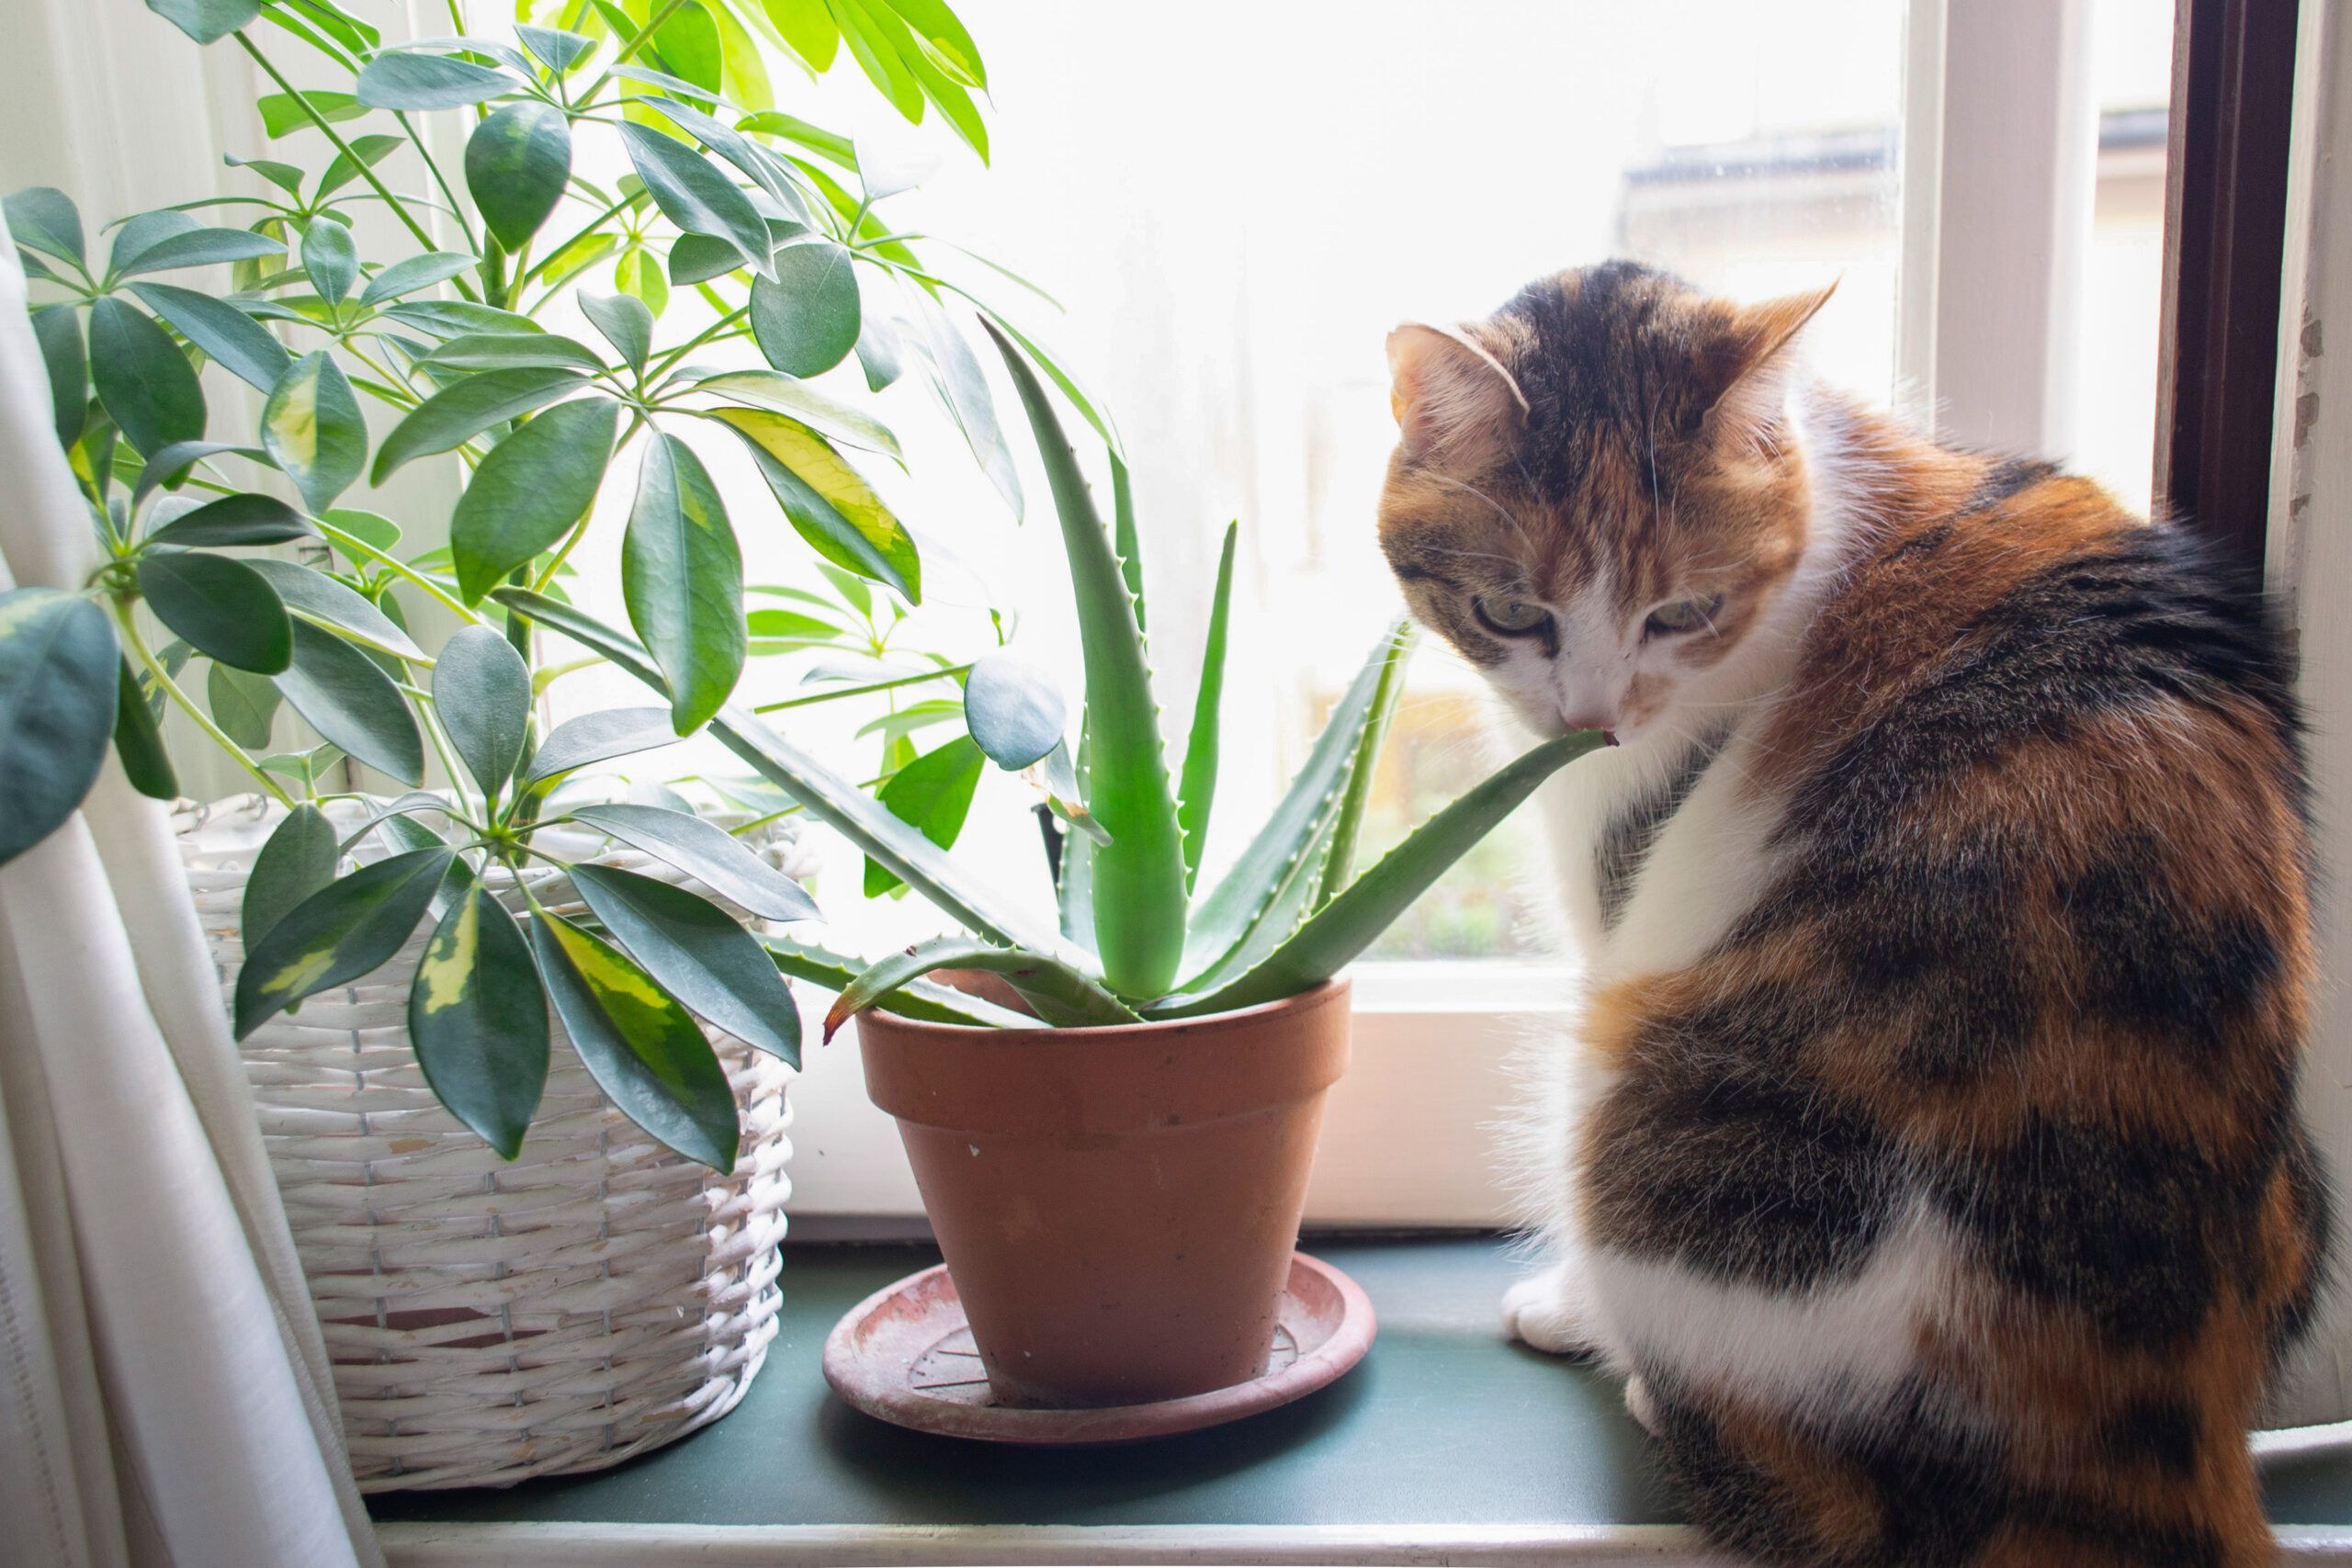 Cat next to an aloe plant